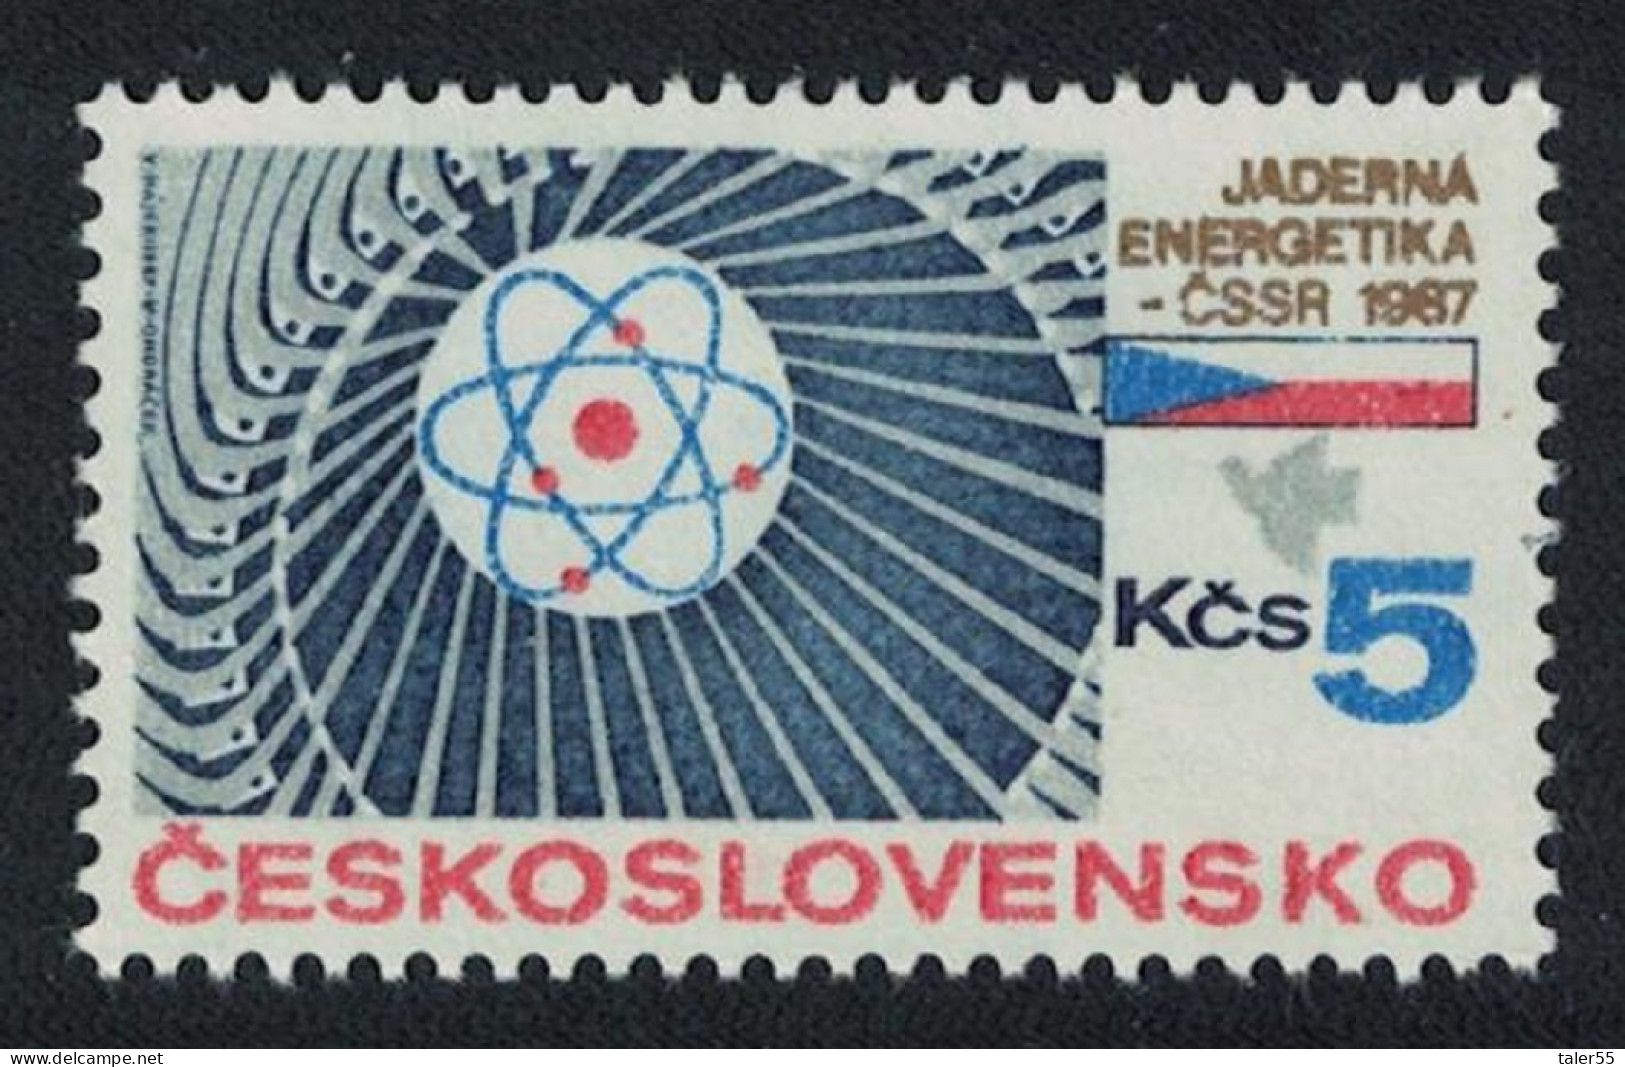 Czechoslovakia Nuclear Power Industry 1987 MNH SG#2875 - Unused Stamps